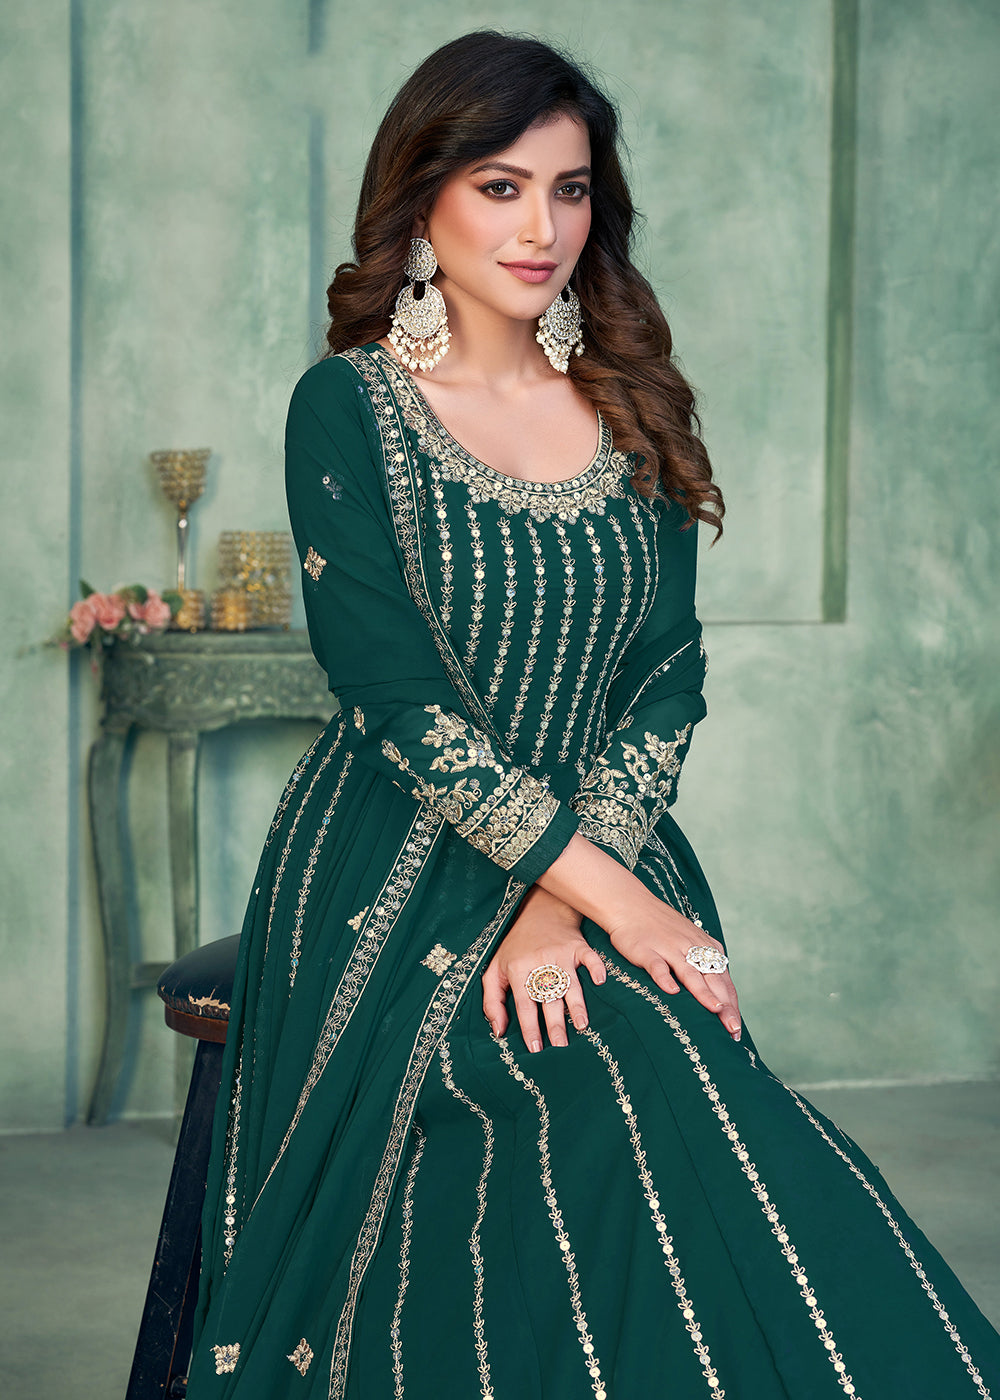 Buy Now Georgette Fabric Green Embroidered Wedding Party Anarkali Suit Online in USA, UK, Australia, New Zealand, Canada & Worldwide at Empress Clothing. 